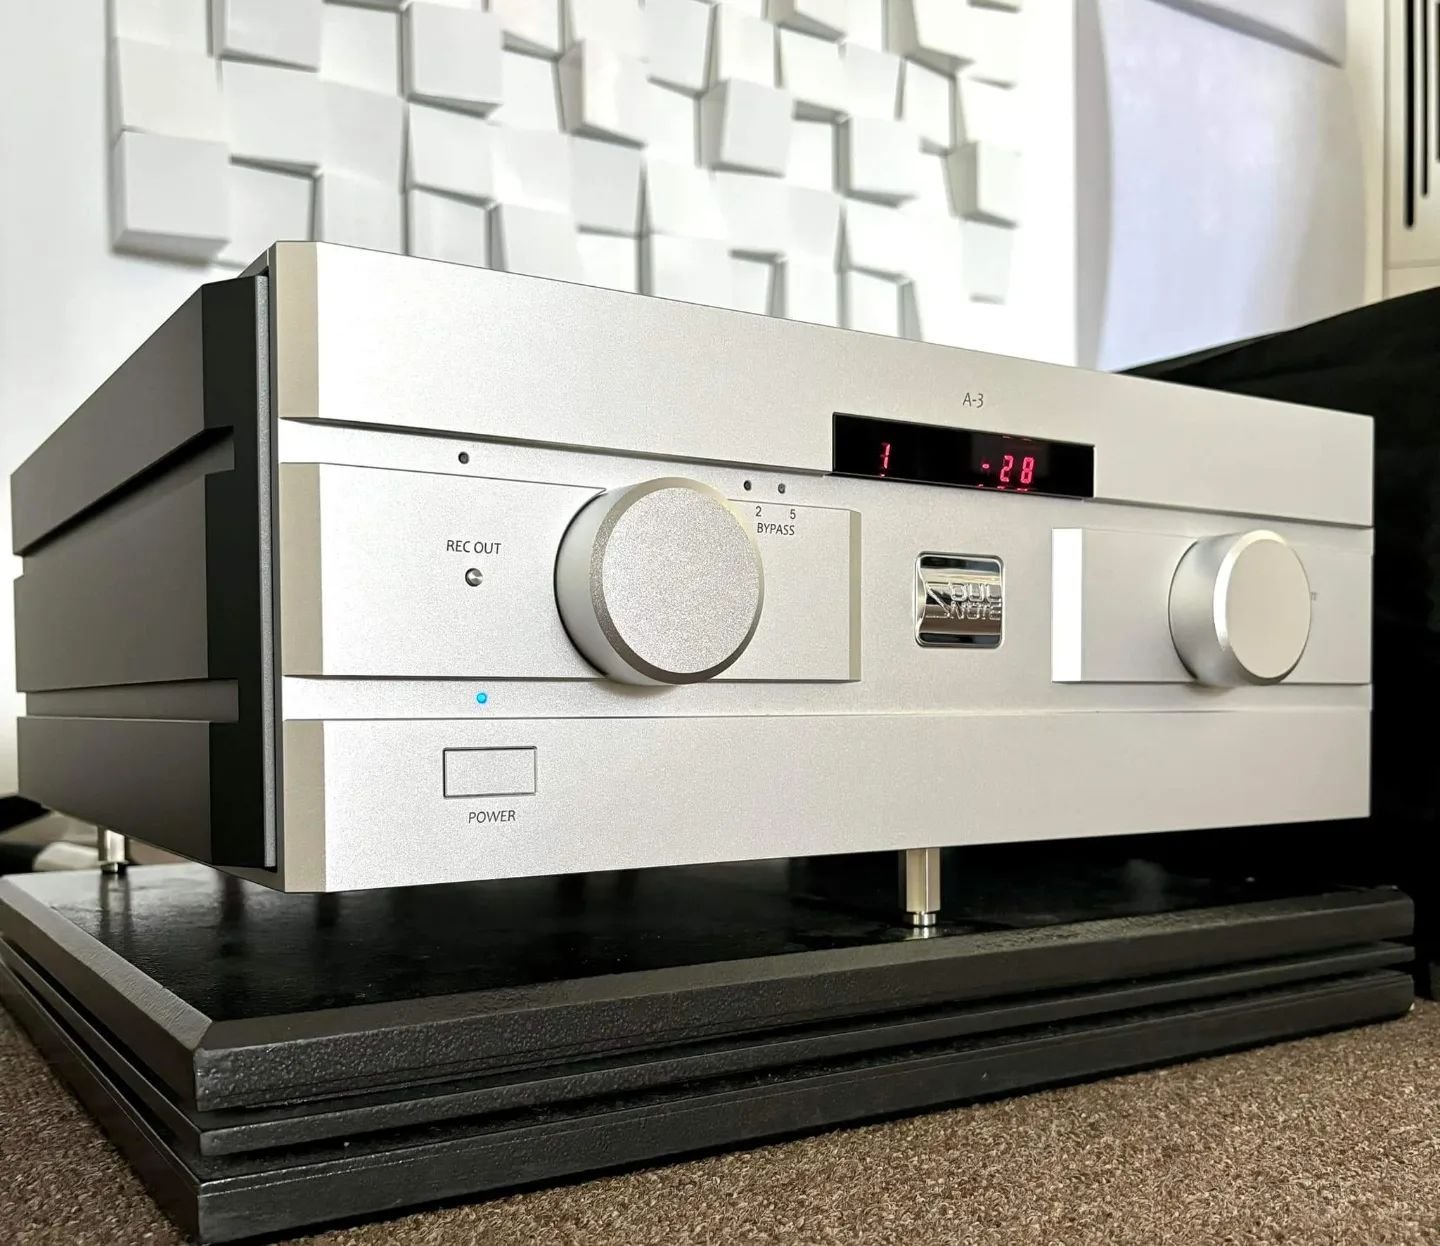 Head over to Soundstage Australia for another astonishing review of the Soulnote A3 super integrated amplifier!

www.valhifi.co.uk/soulnote 

#soulnote #soulnotejapan #soulnotea3 #soulnote3series #kogaudio #boutiquehifi #highend  #integratedamp #amp 